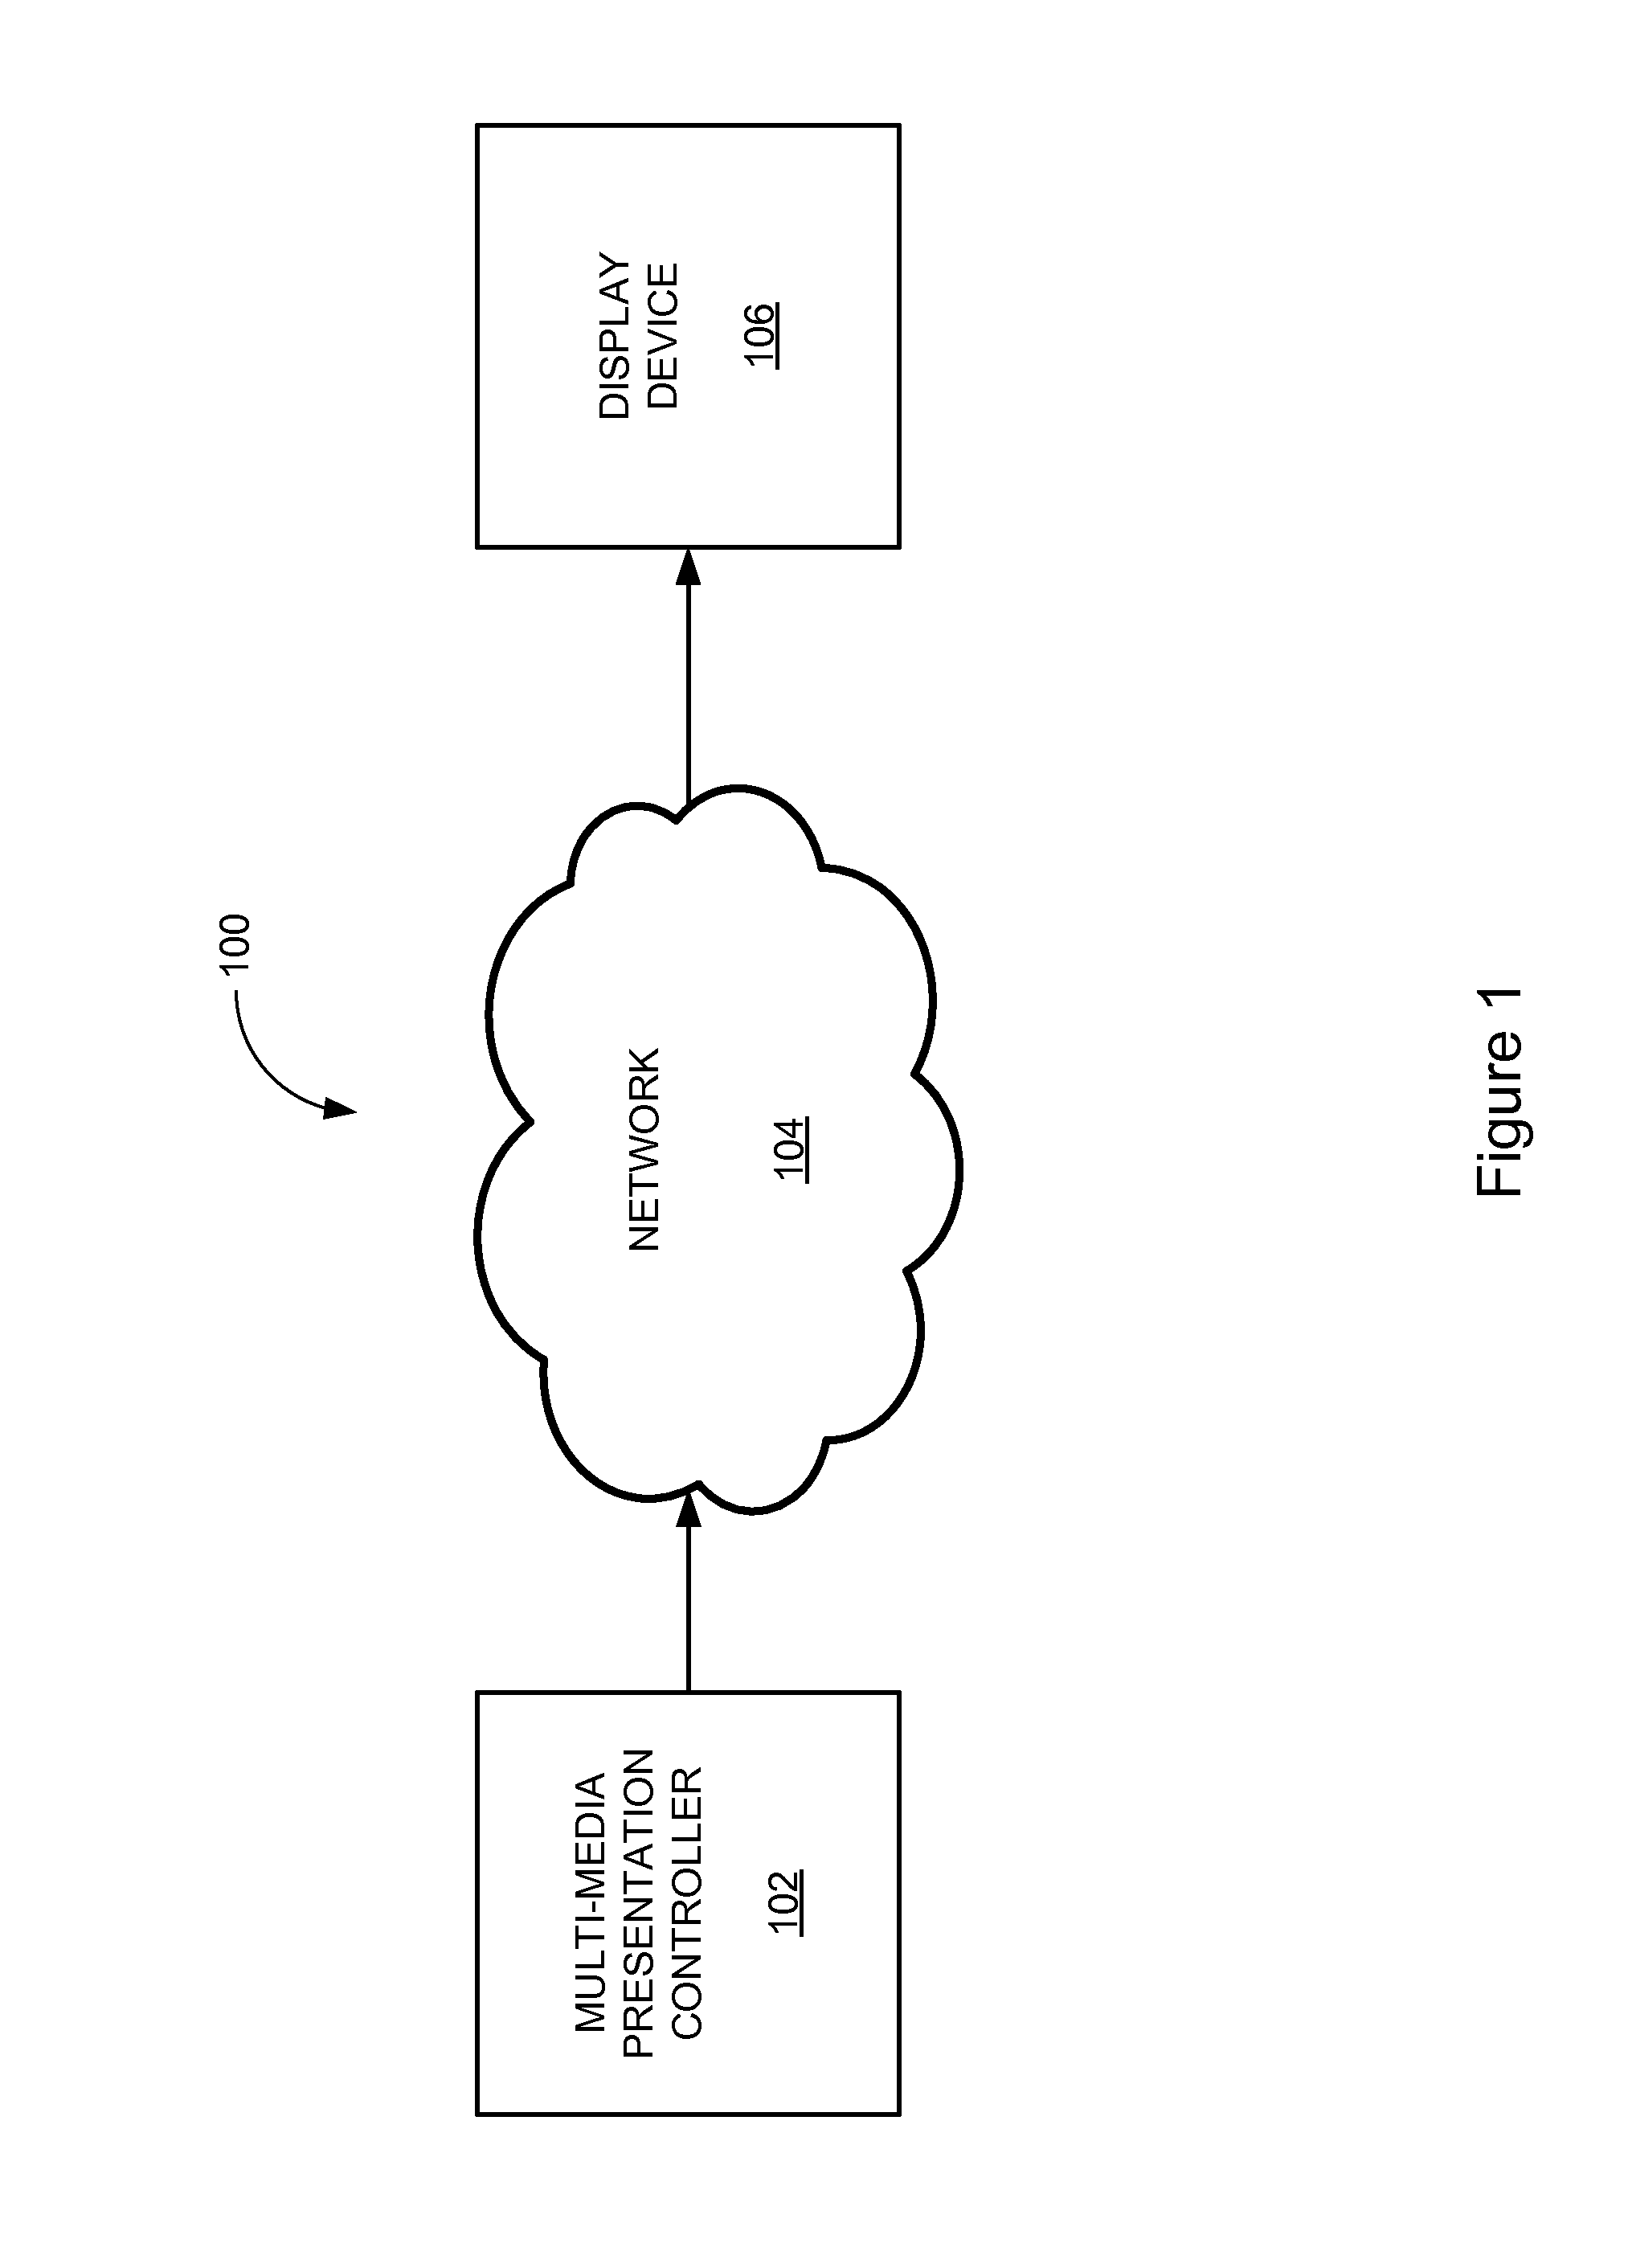 Apparatus and method for controlling a multi-media presentation